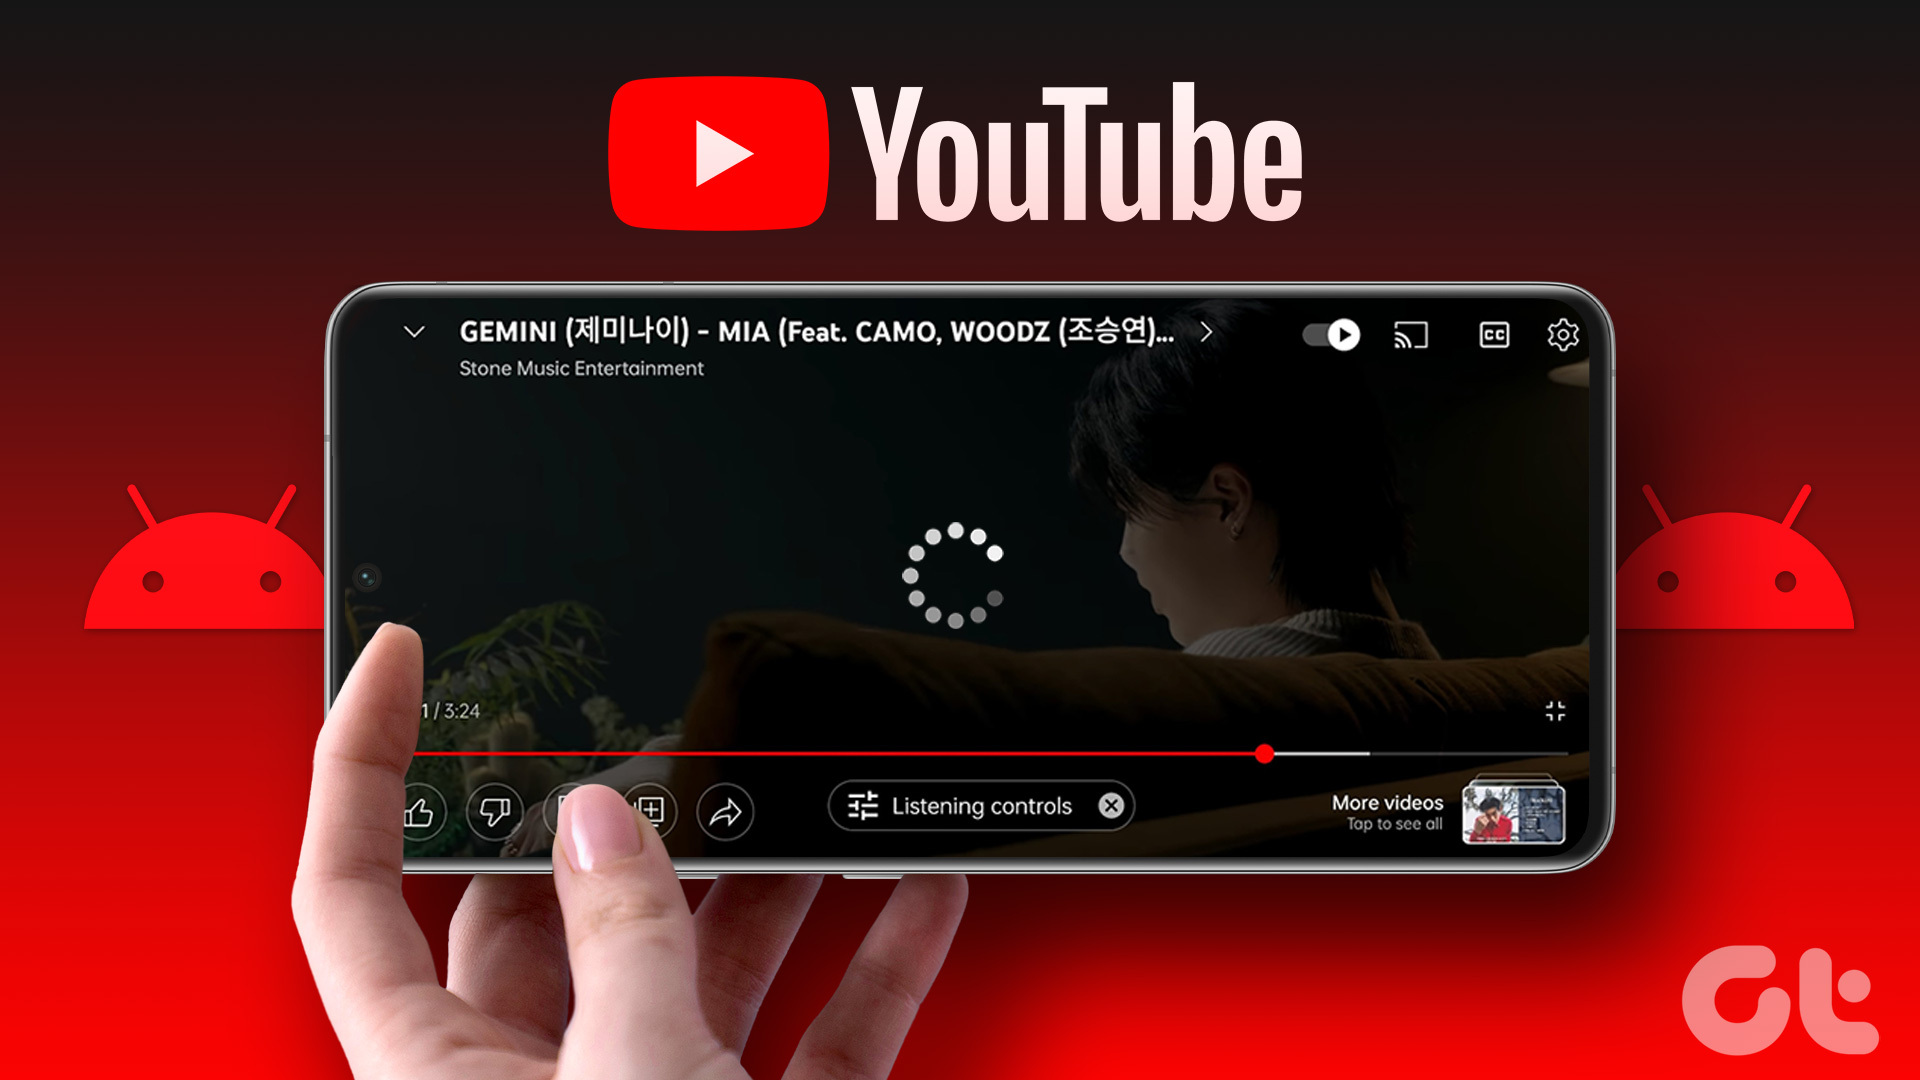 Fix YouTube video lag on Android